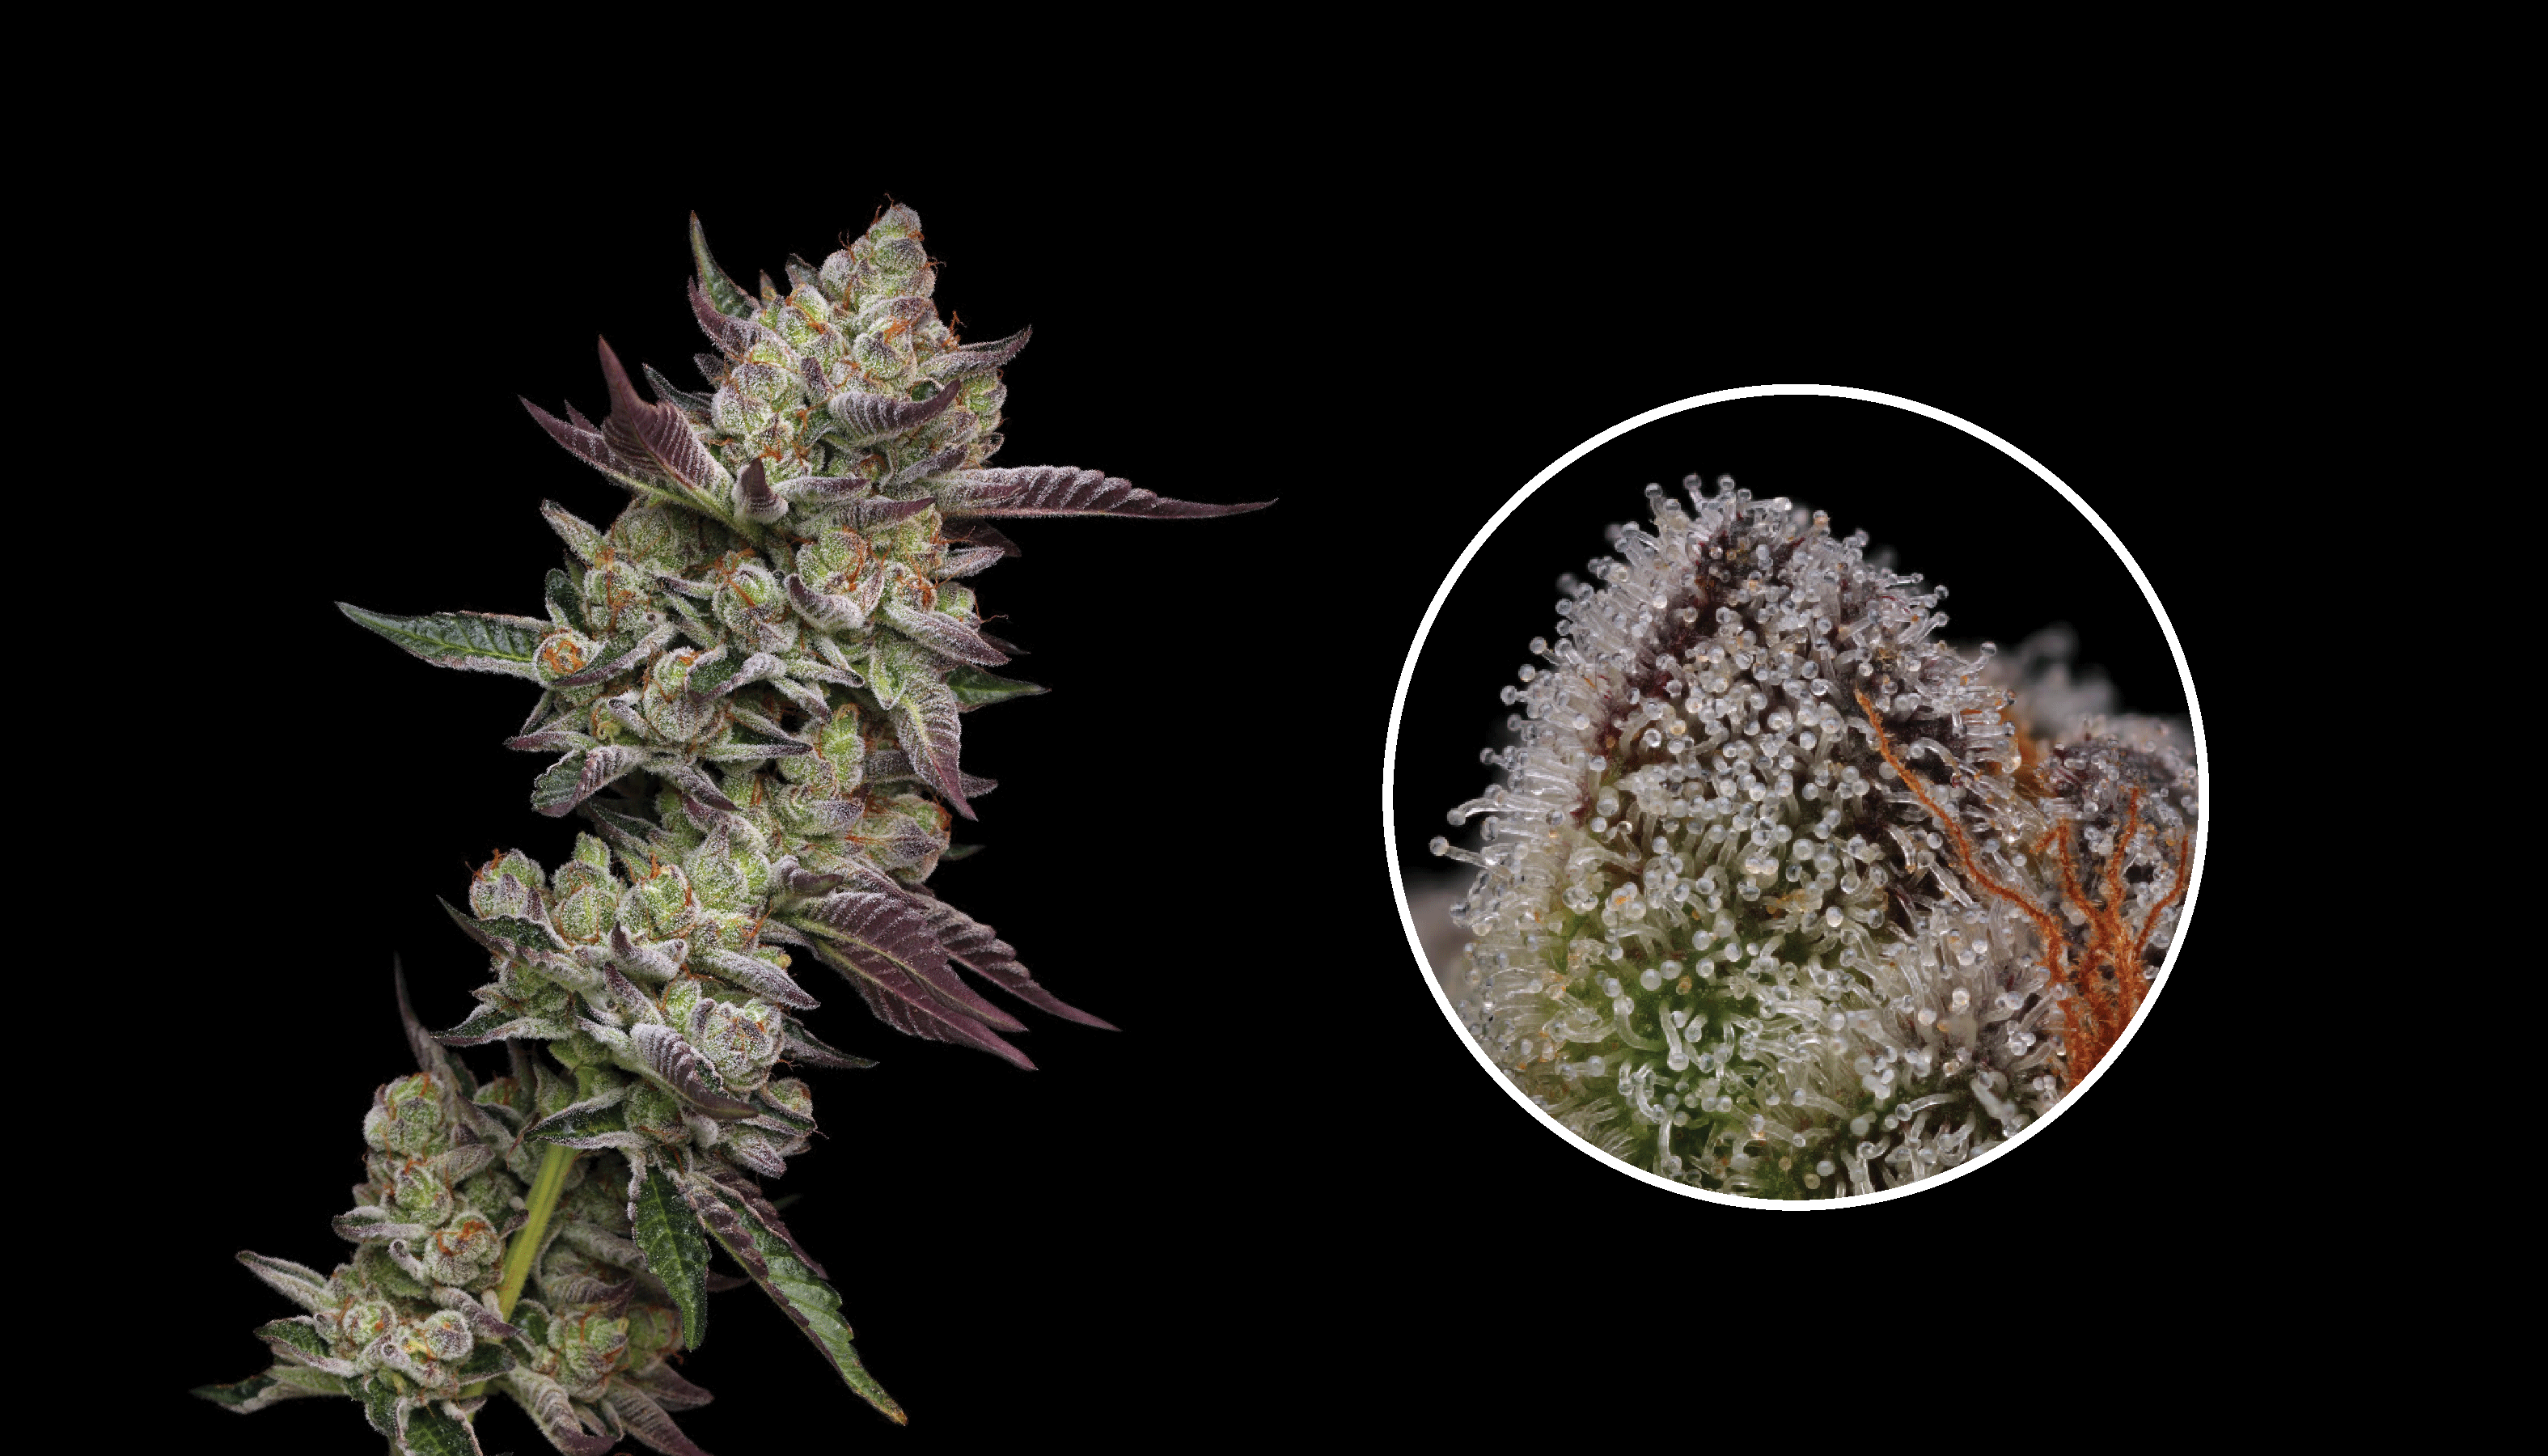 Breeder's Insights: Poddy Mouth cannabis seeds, a cross of Mountaintop Mint x Humboldt Pound Cake, has a fuel-forward, gassy nose with a sweet finish.